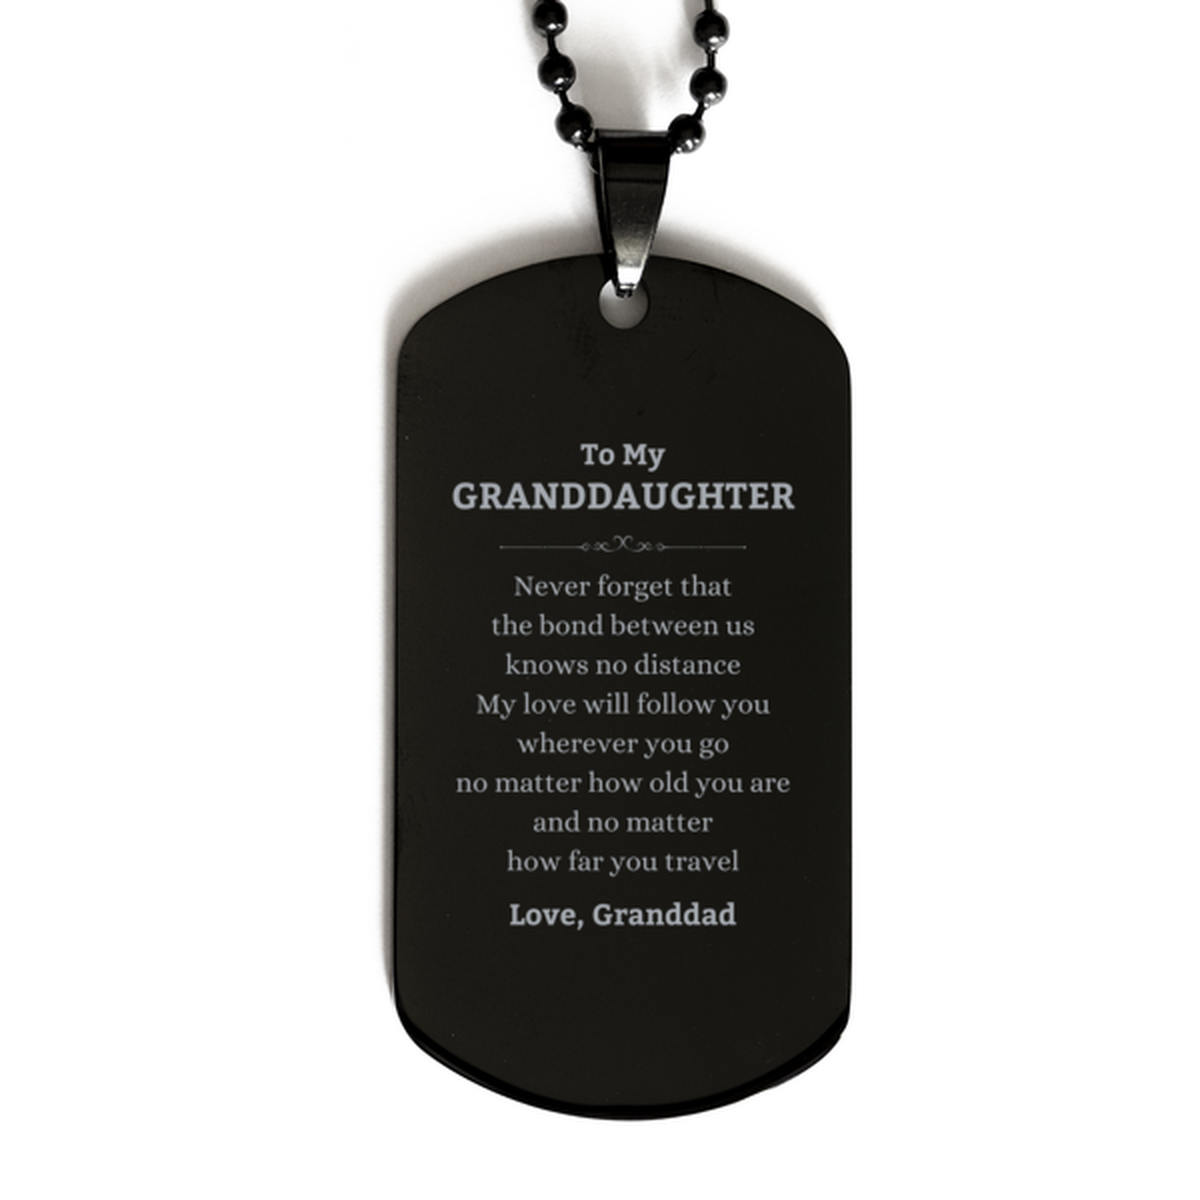 Granddaughter Birthday Gifts from Granddad, Adjustable Black Dog Tag for Granddaughter Christmas Graduation Unique Gifts Granddaughter Never forget that the bond between us knows no distance. Love, Granddad